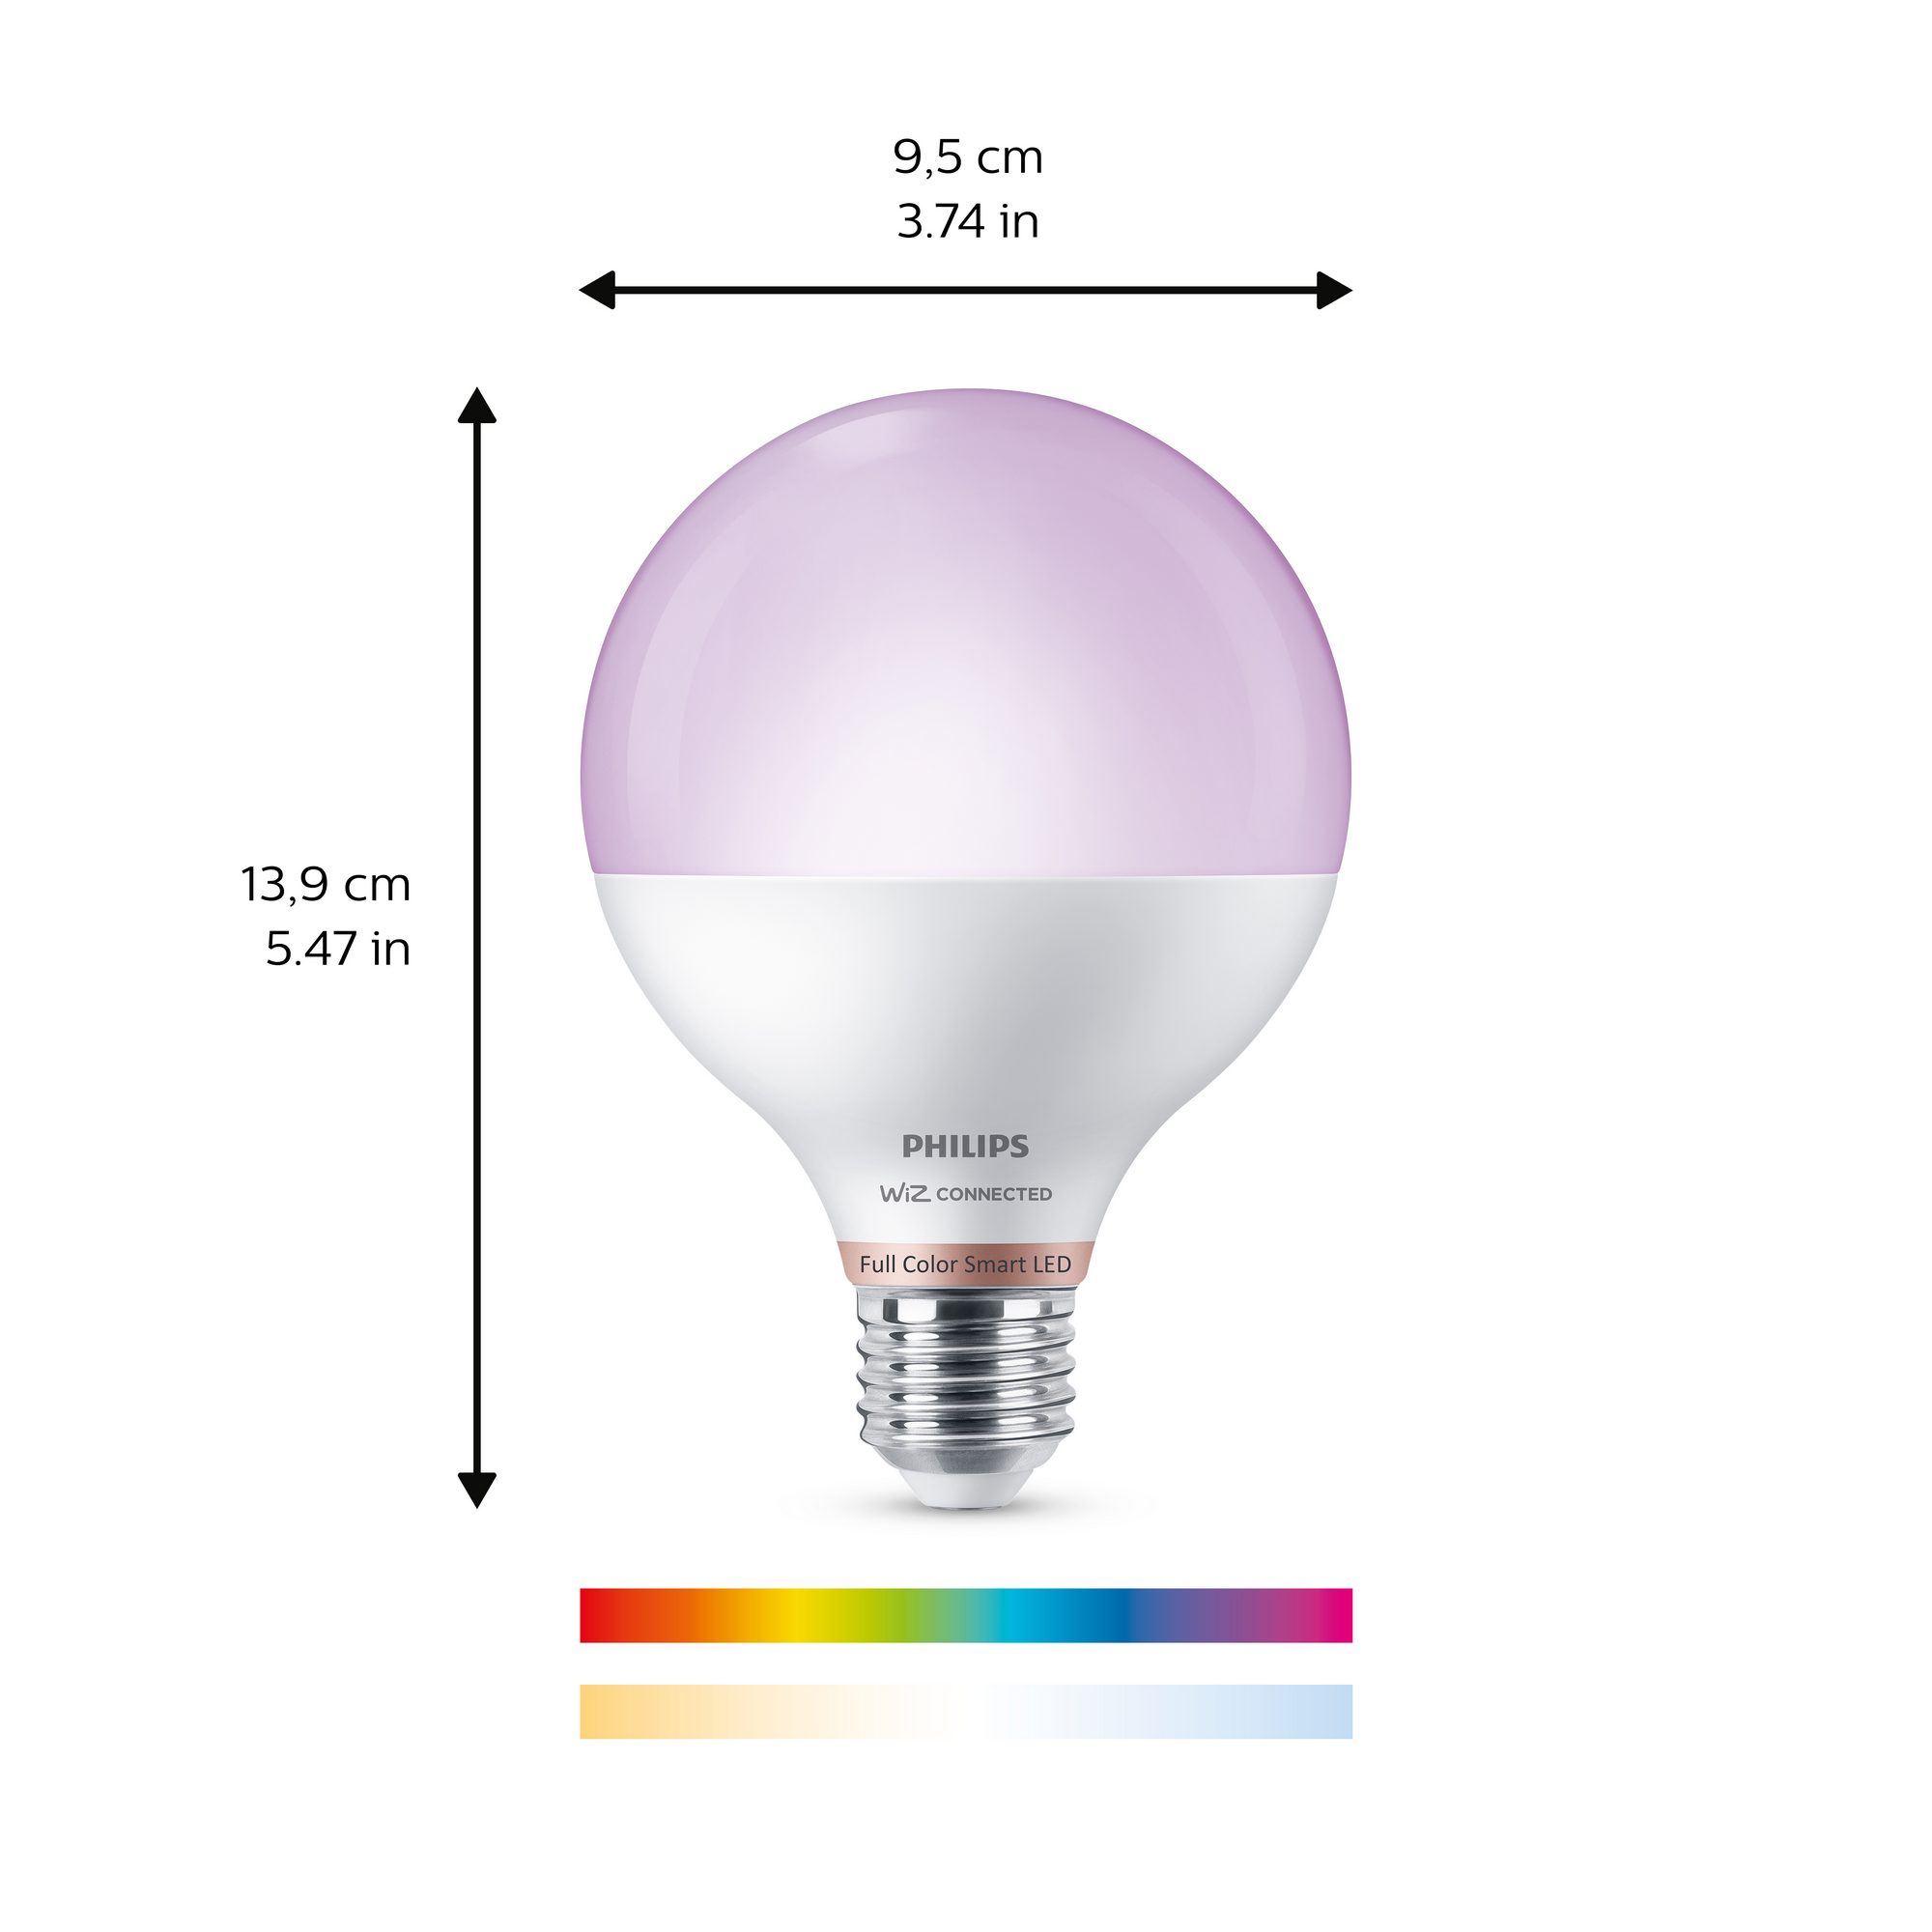 LED-Lampe 'SmartLED' 1055 lm E27 Globe weiß + product picture